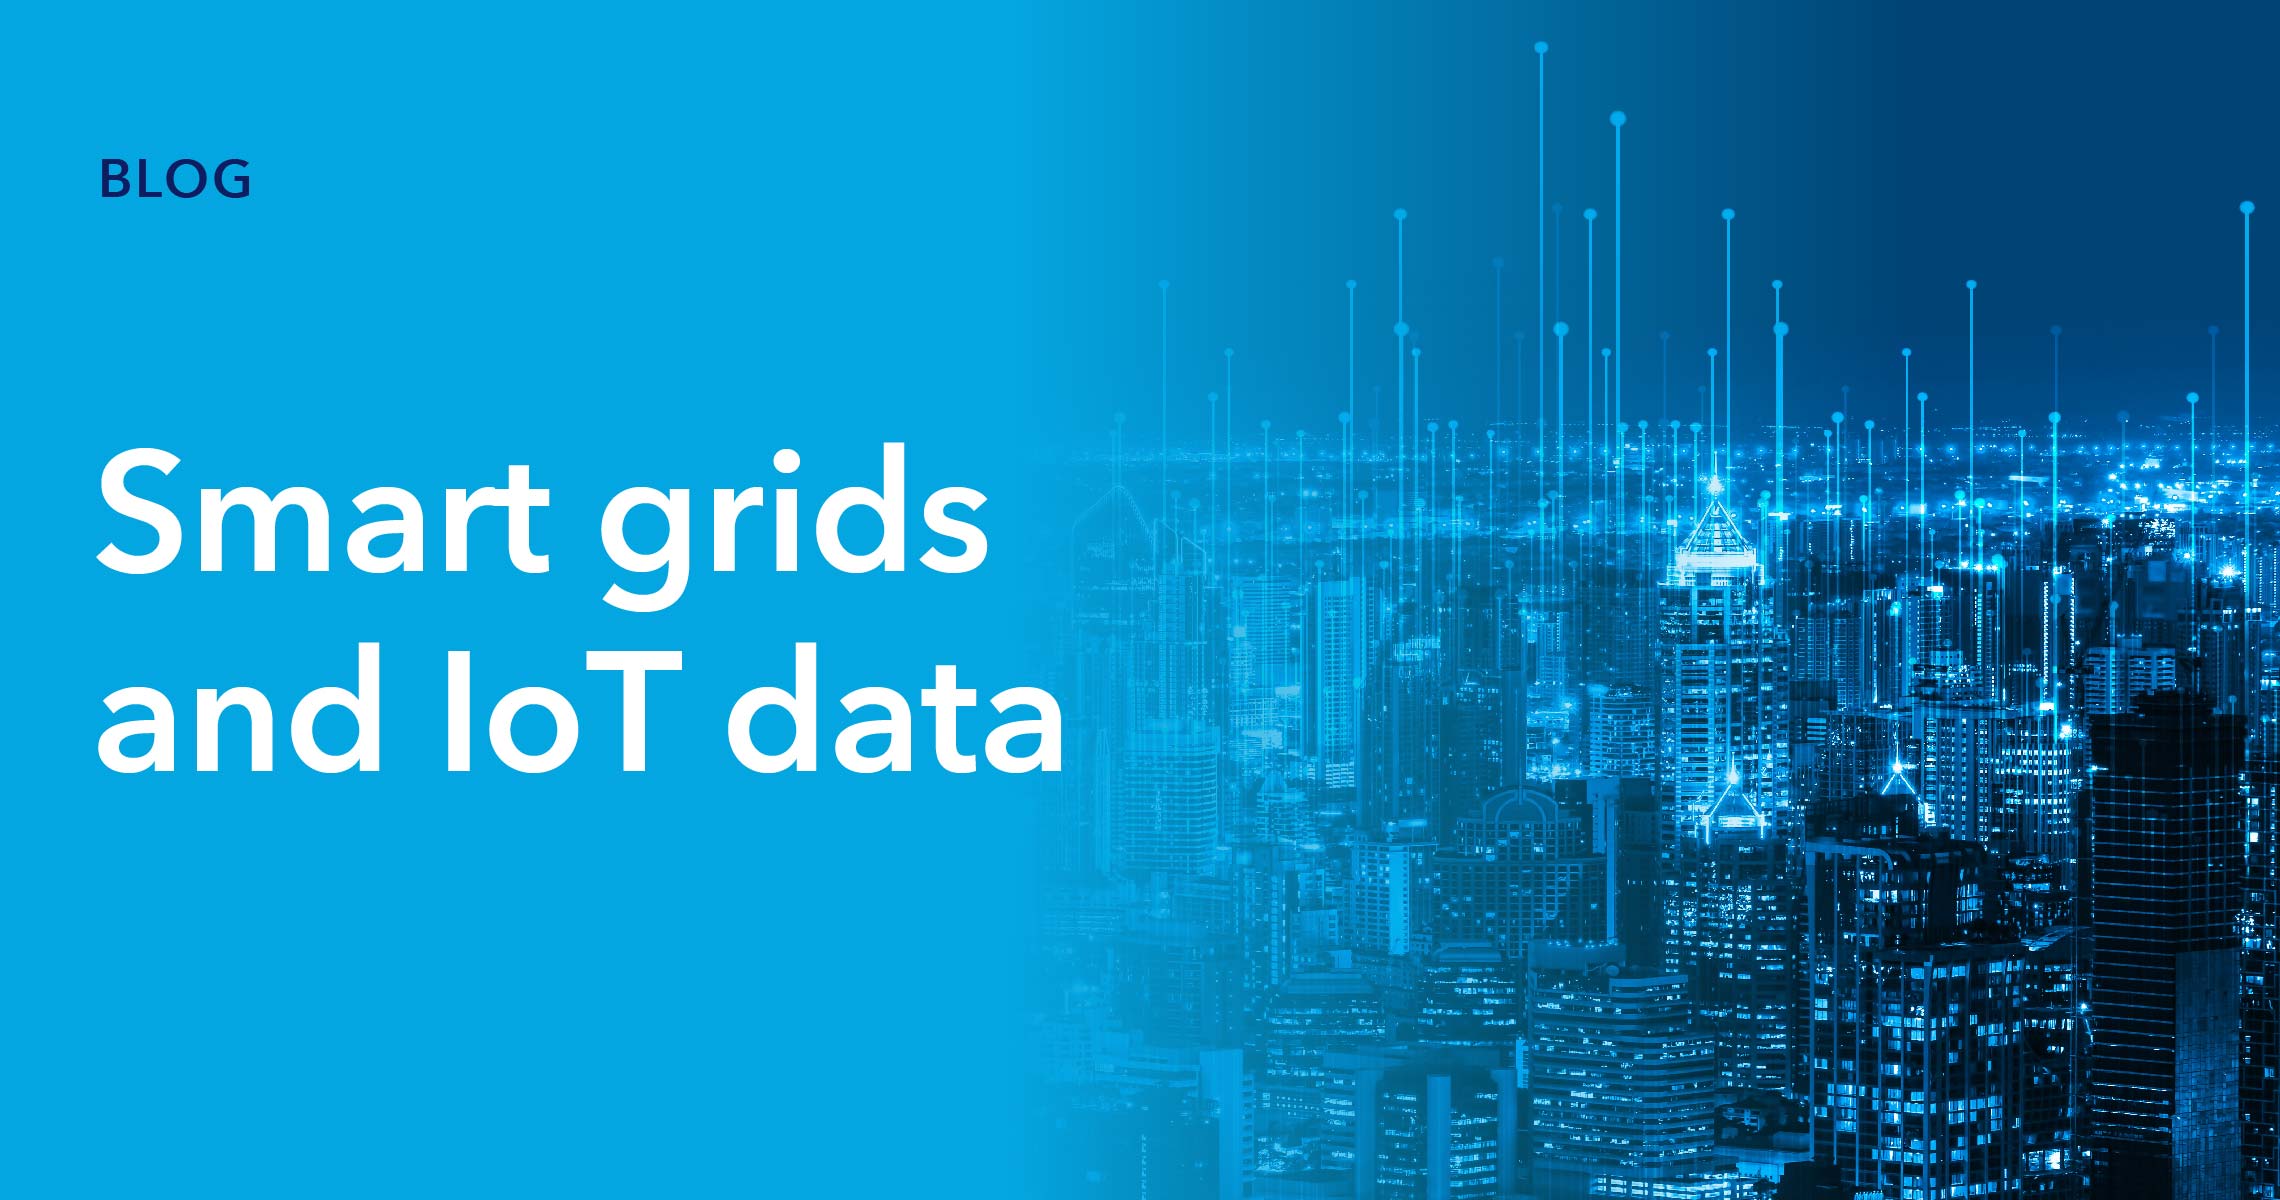 Secure data processing for smart grids and IoT